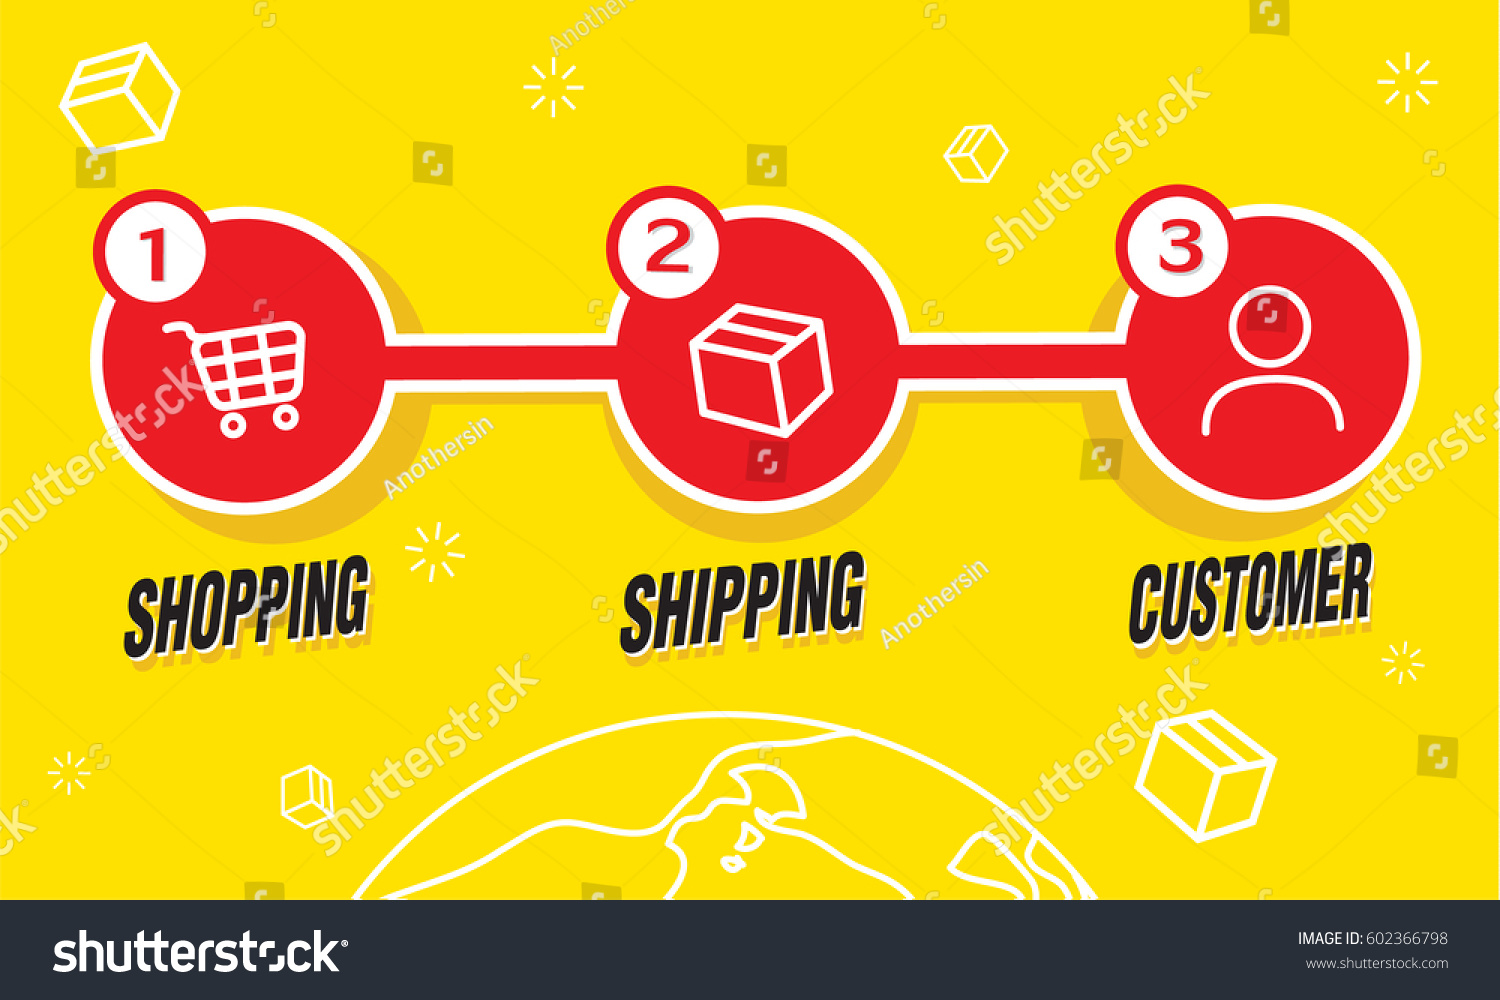 Online Shop Infographics Stepbystep Guide Stock Vector (Royalty Free) 602366798 | Shutterstock